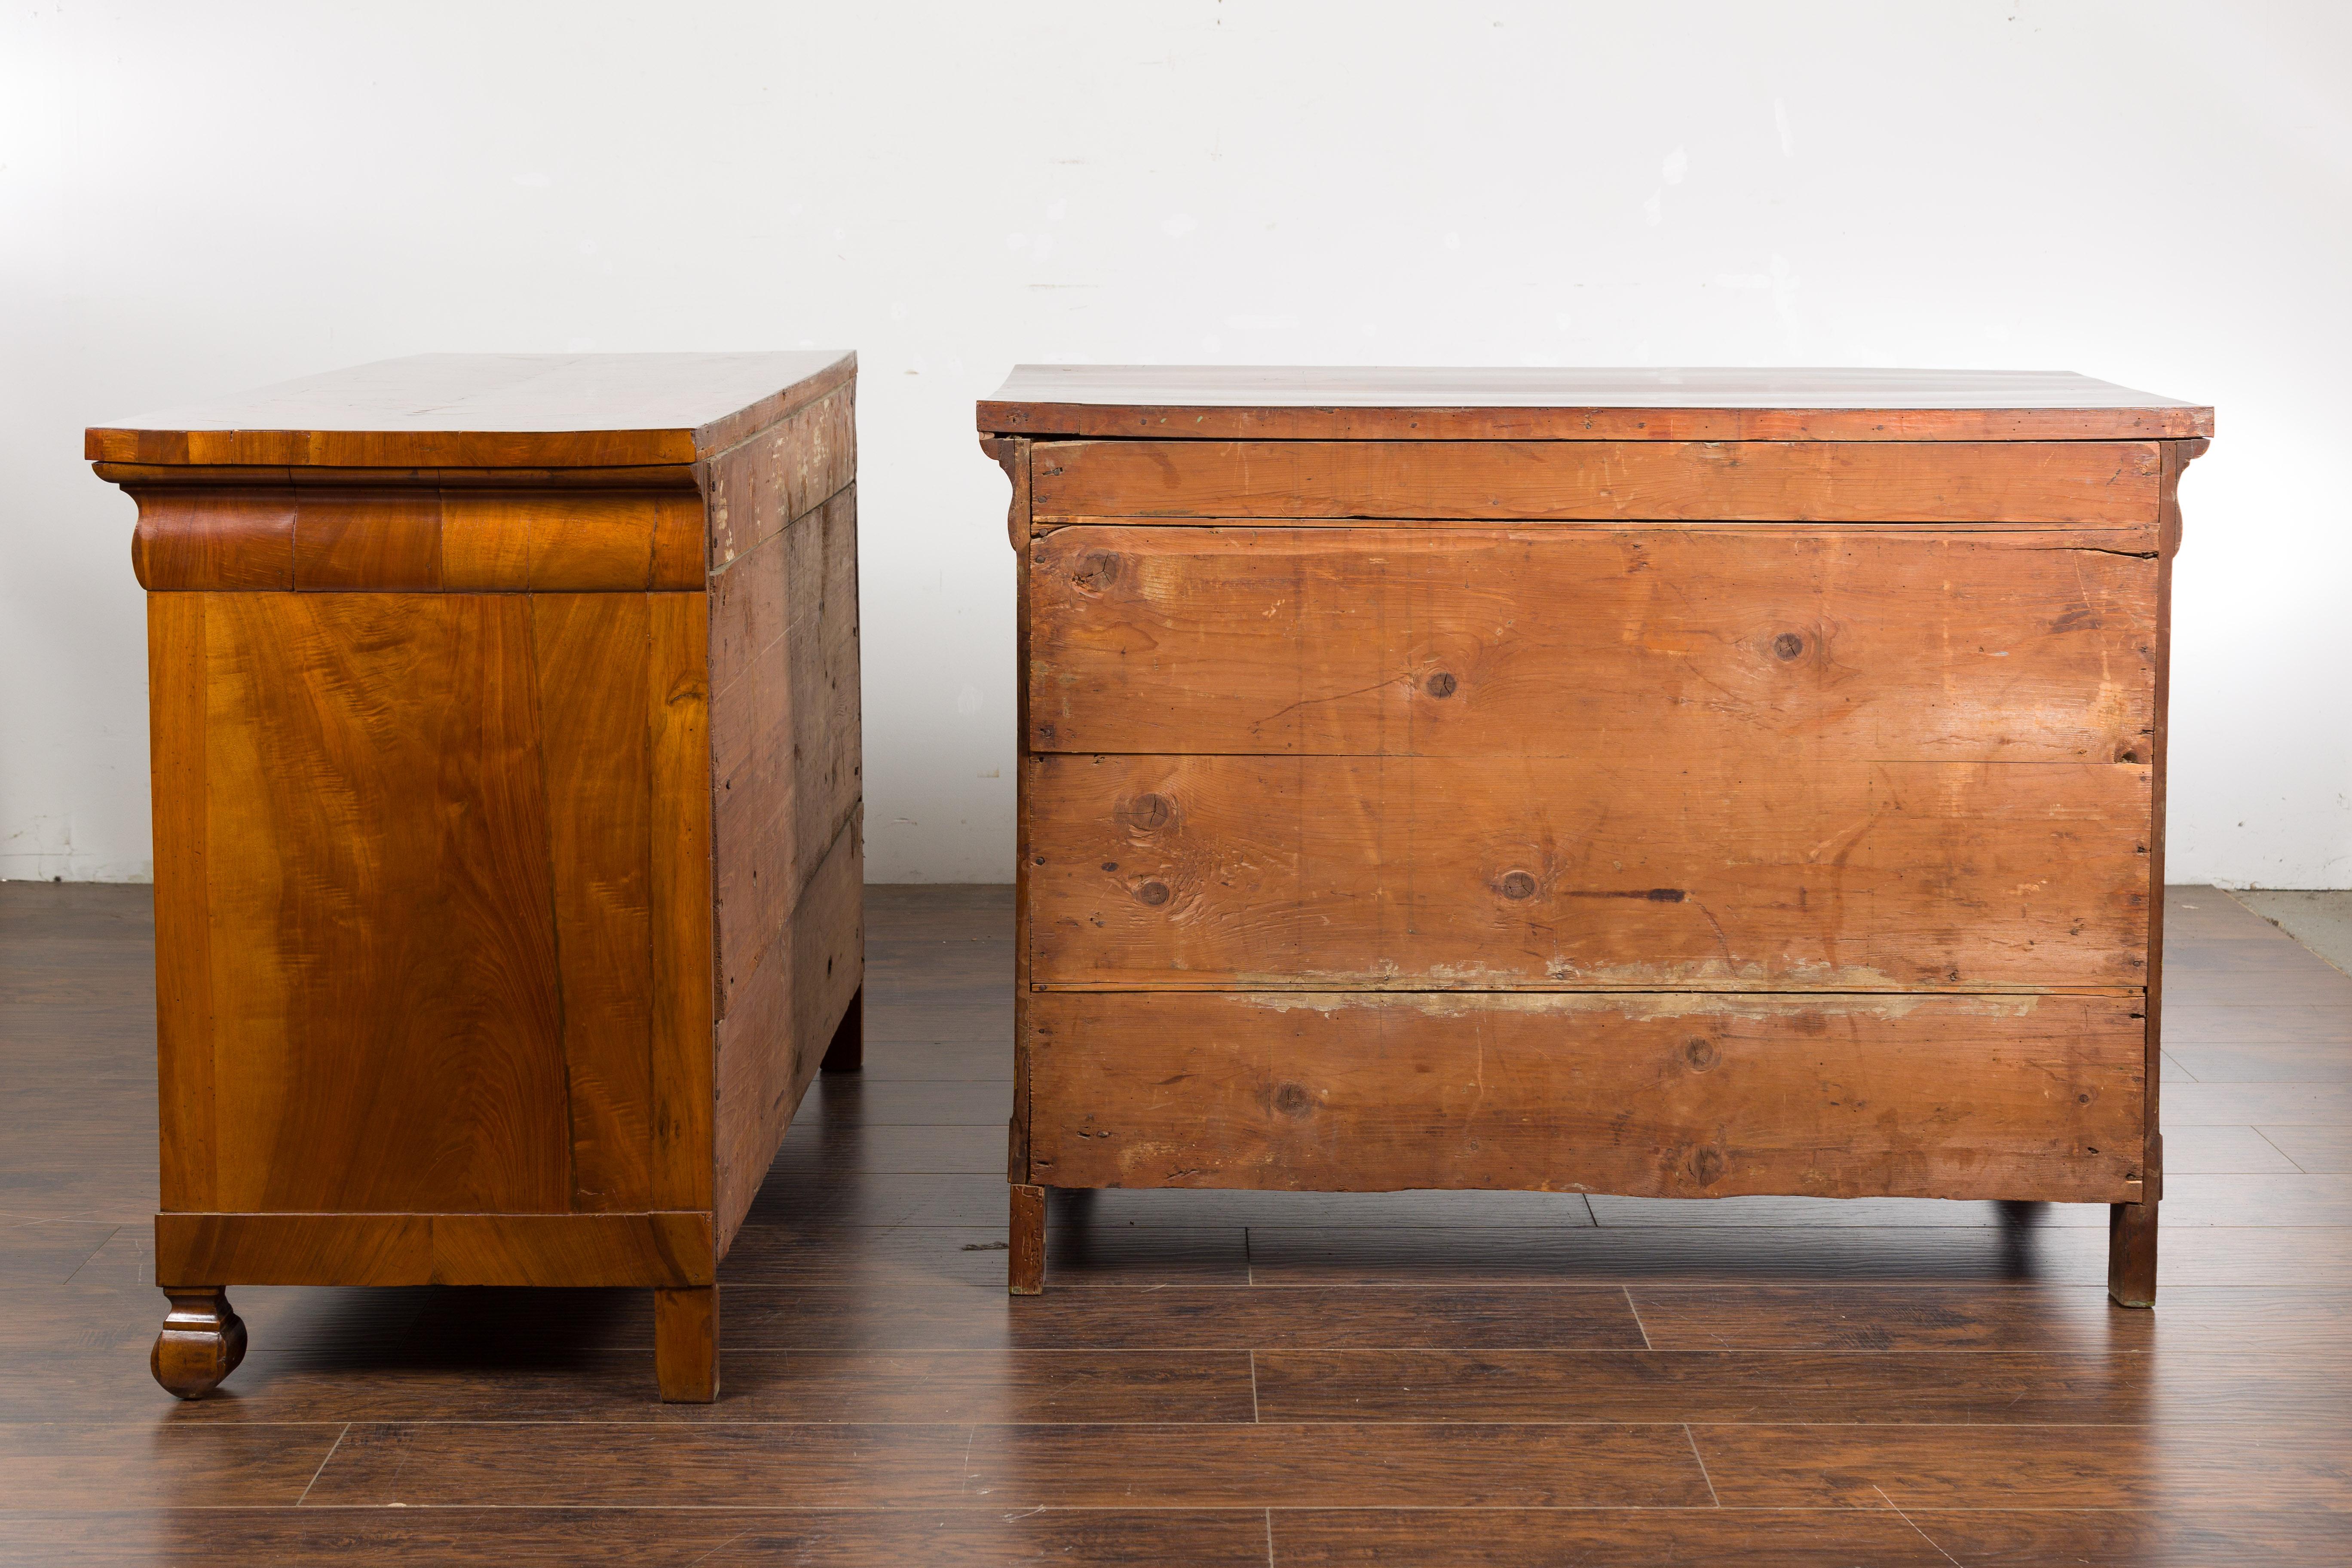 Pair of Italian 18th Century Walnut Four-Drawer Commodes with Bookmatched Veneer For Sale 11